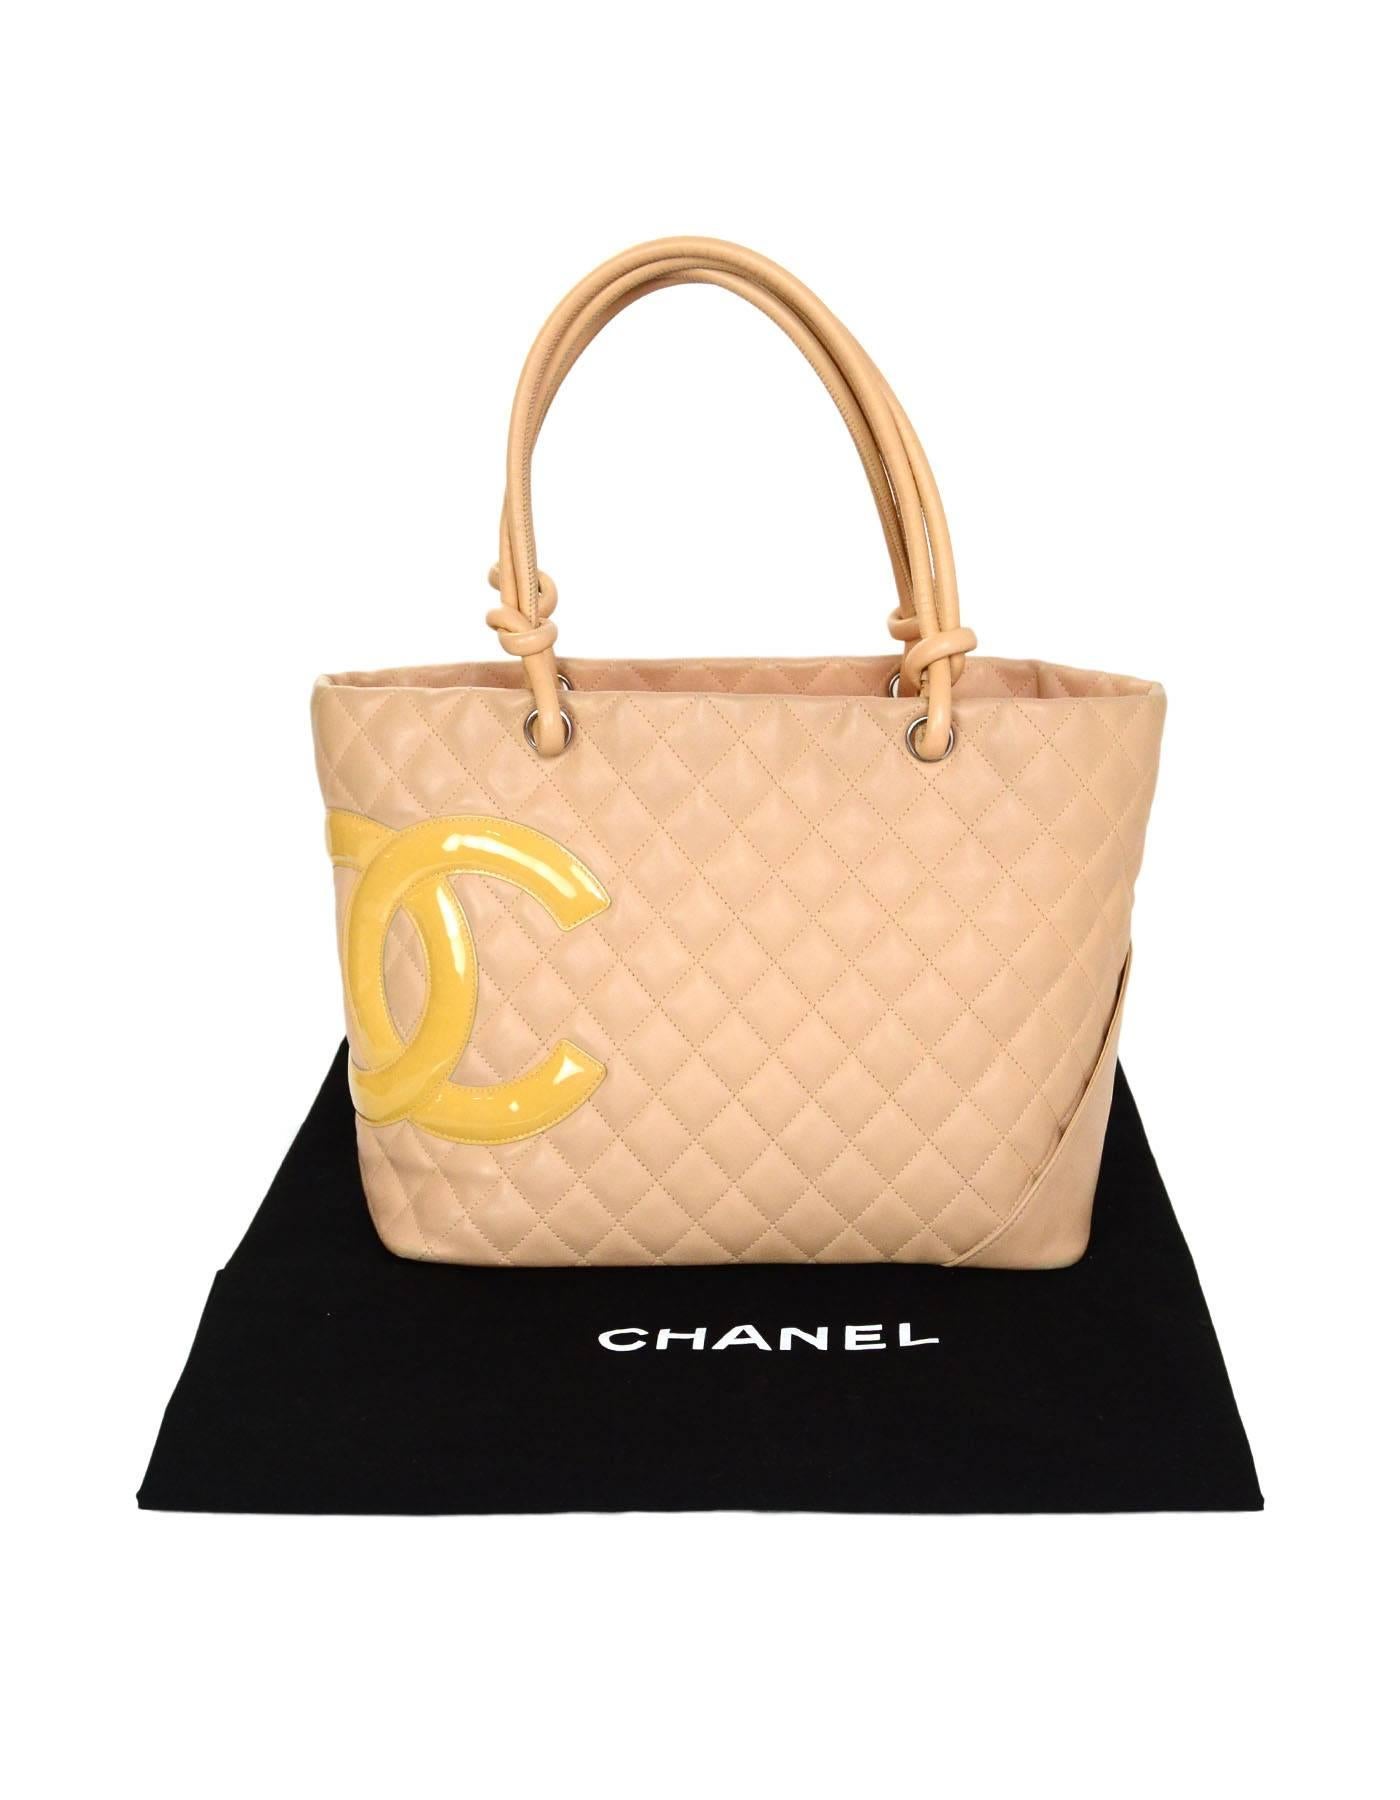 Chanel Beige Leather Quilted CC Cambon Tote Bag 5